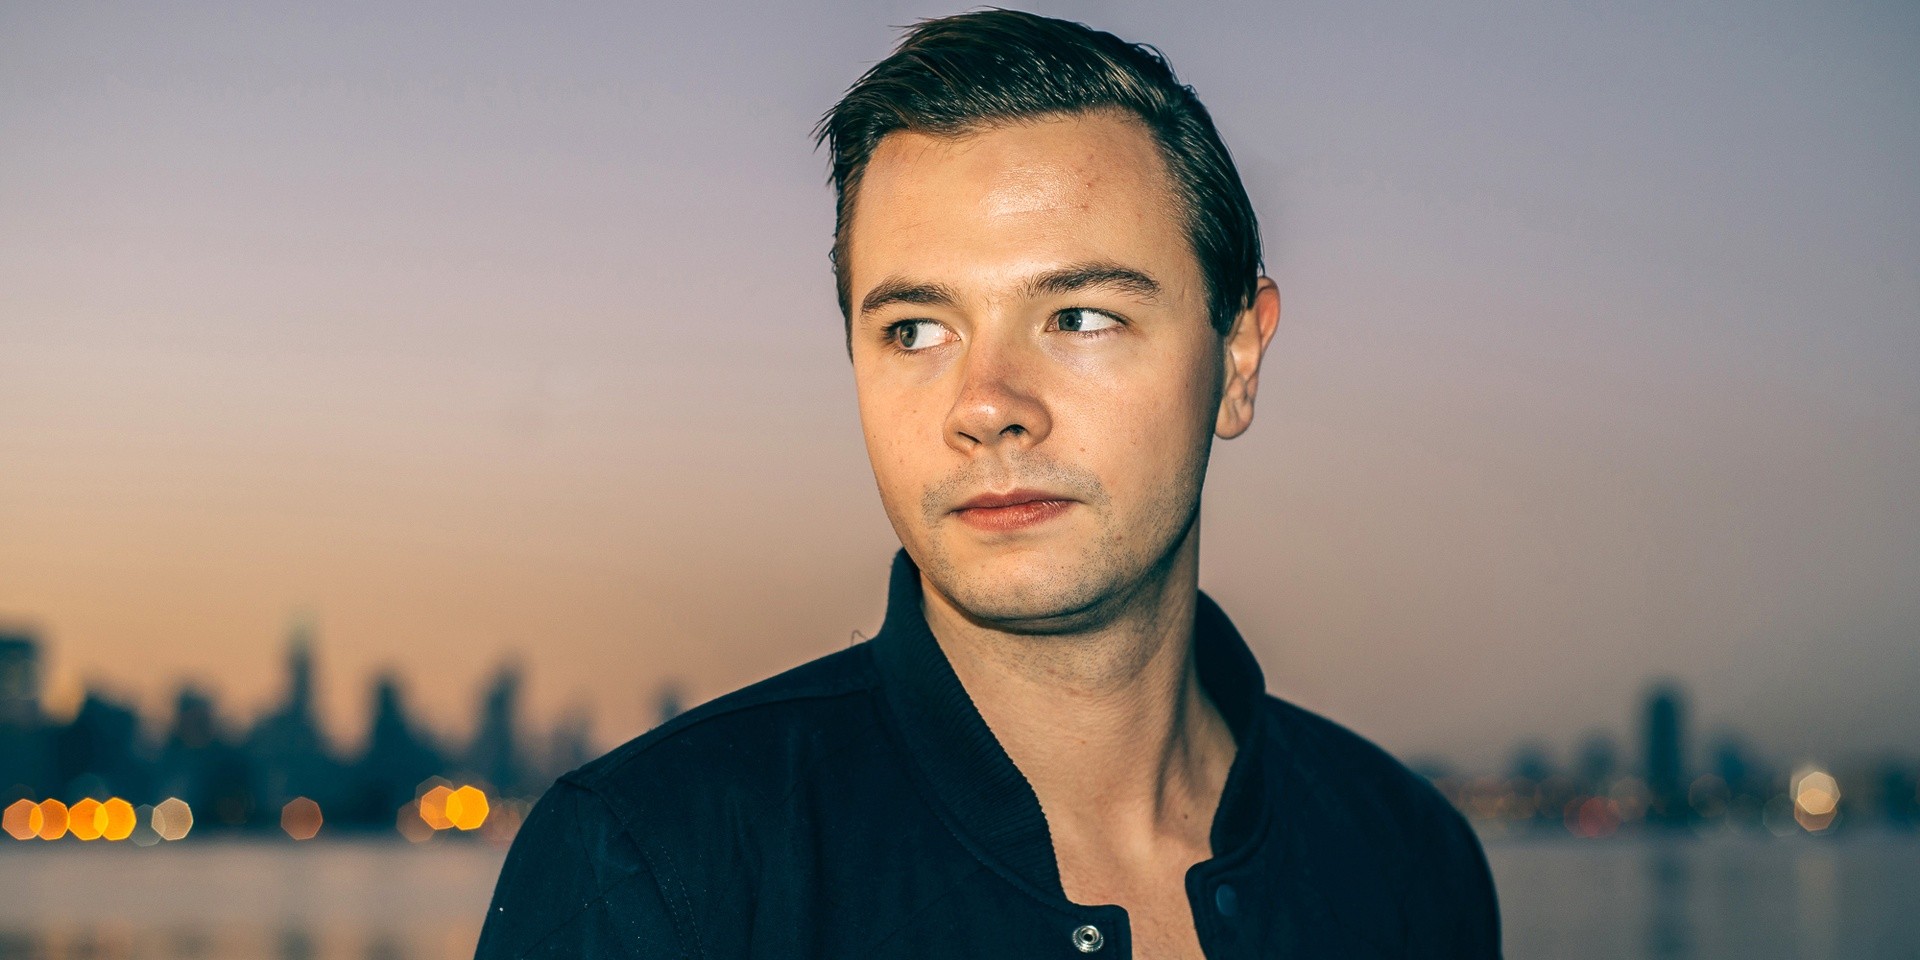 "The two worlds are beginning to blend together, dance music is now on the radio, and regular radio music is becoming heavily dance-influenced": A conversation with Sam Feldt